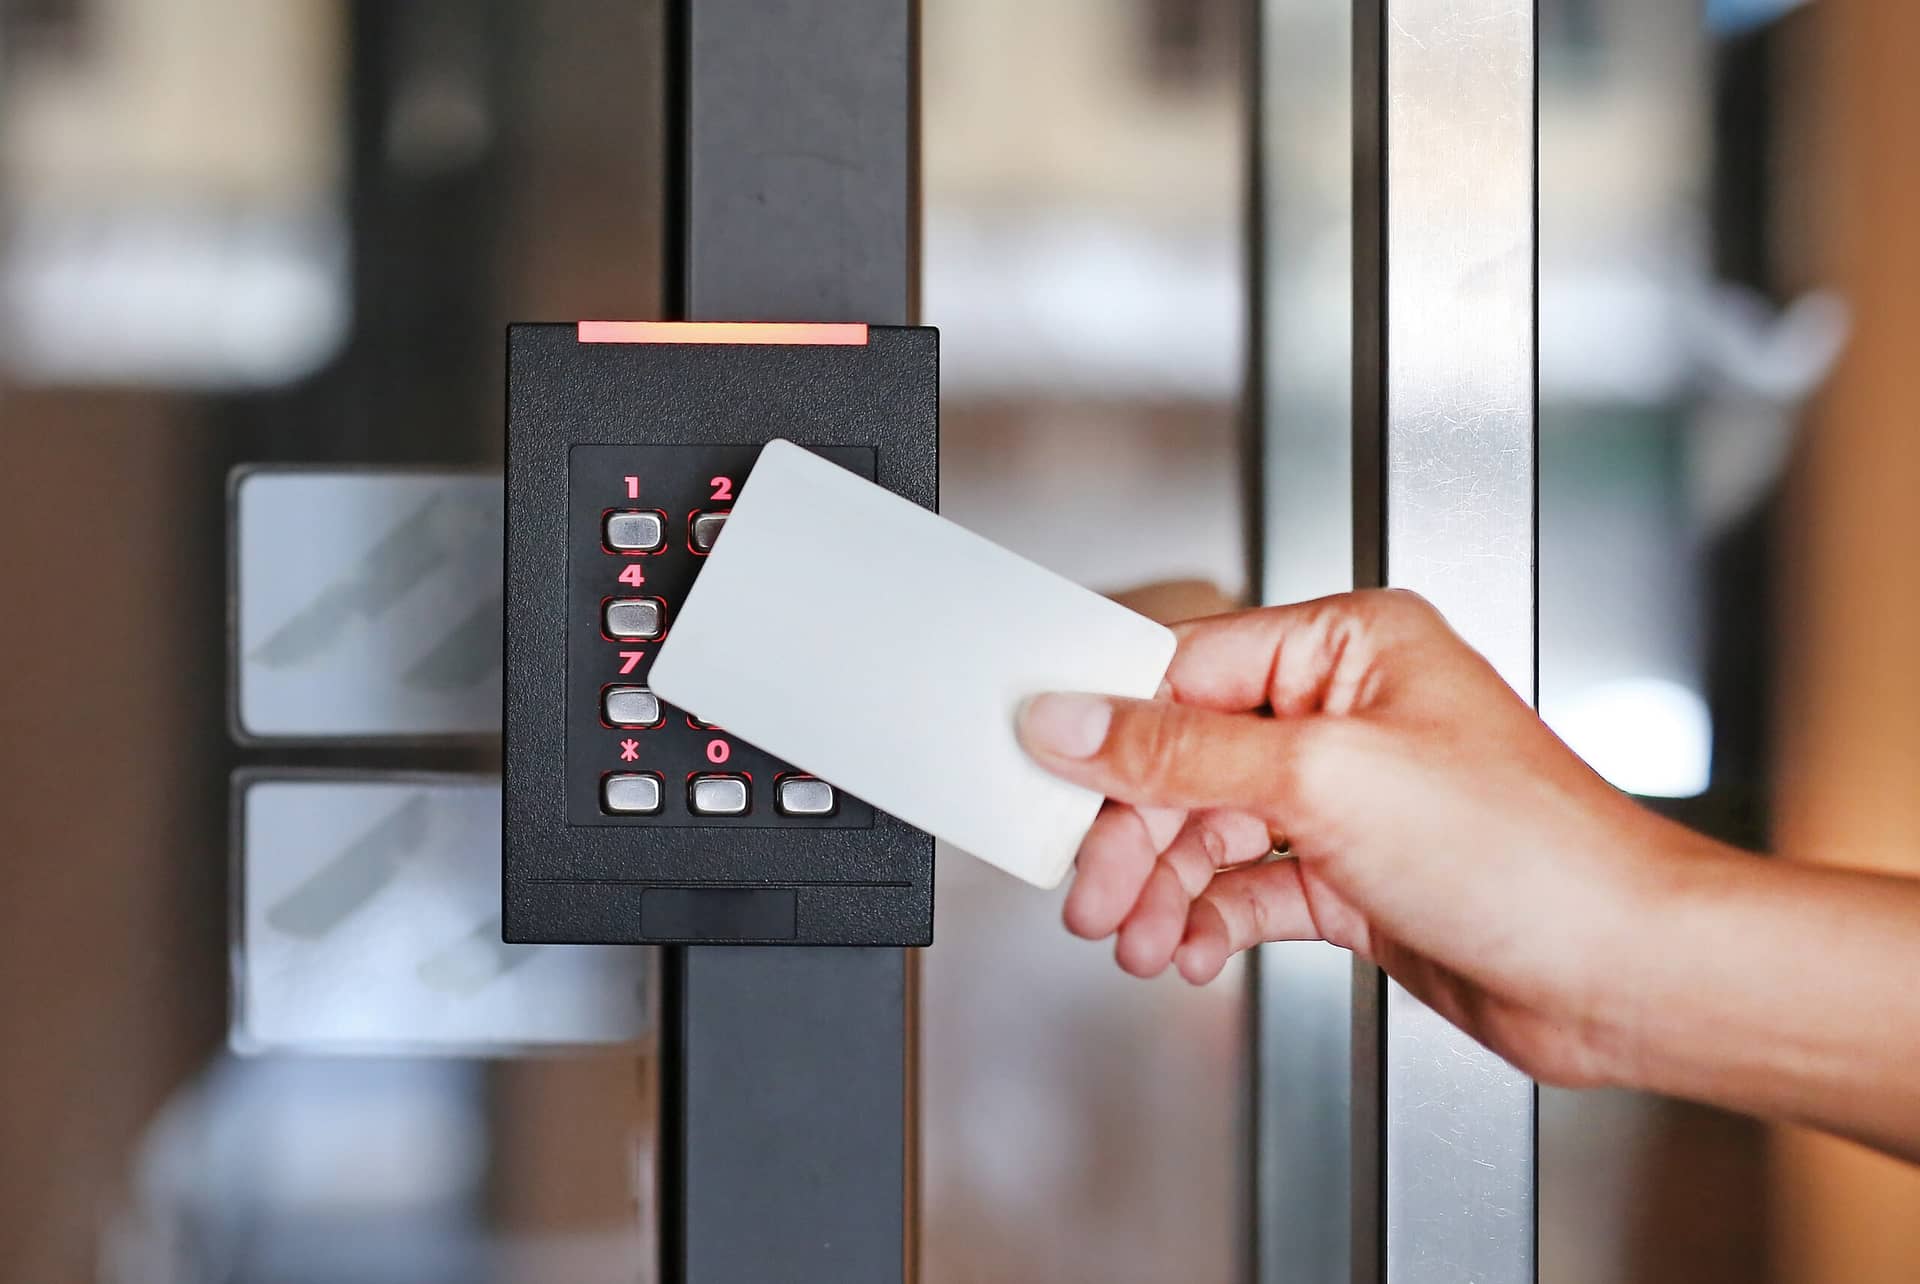 Mistakes made by security and access control sales teams